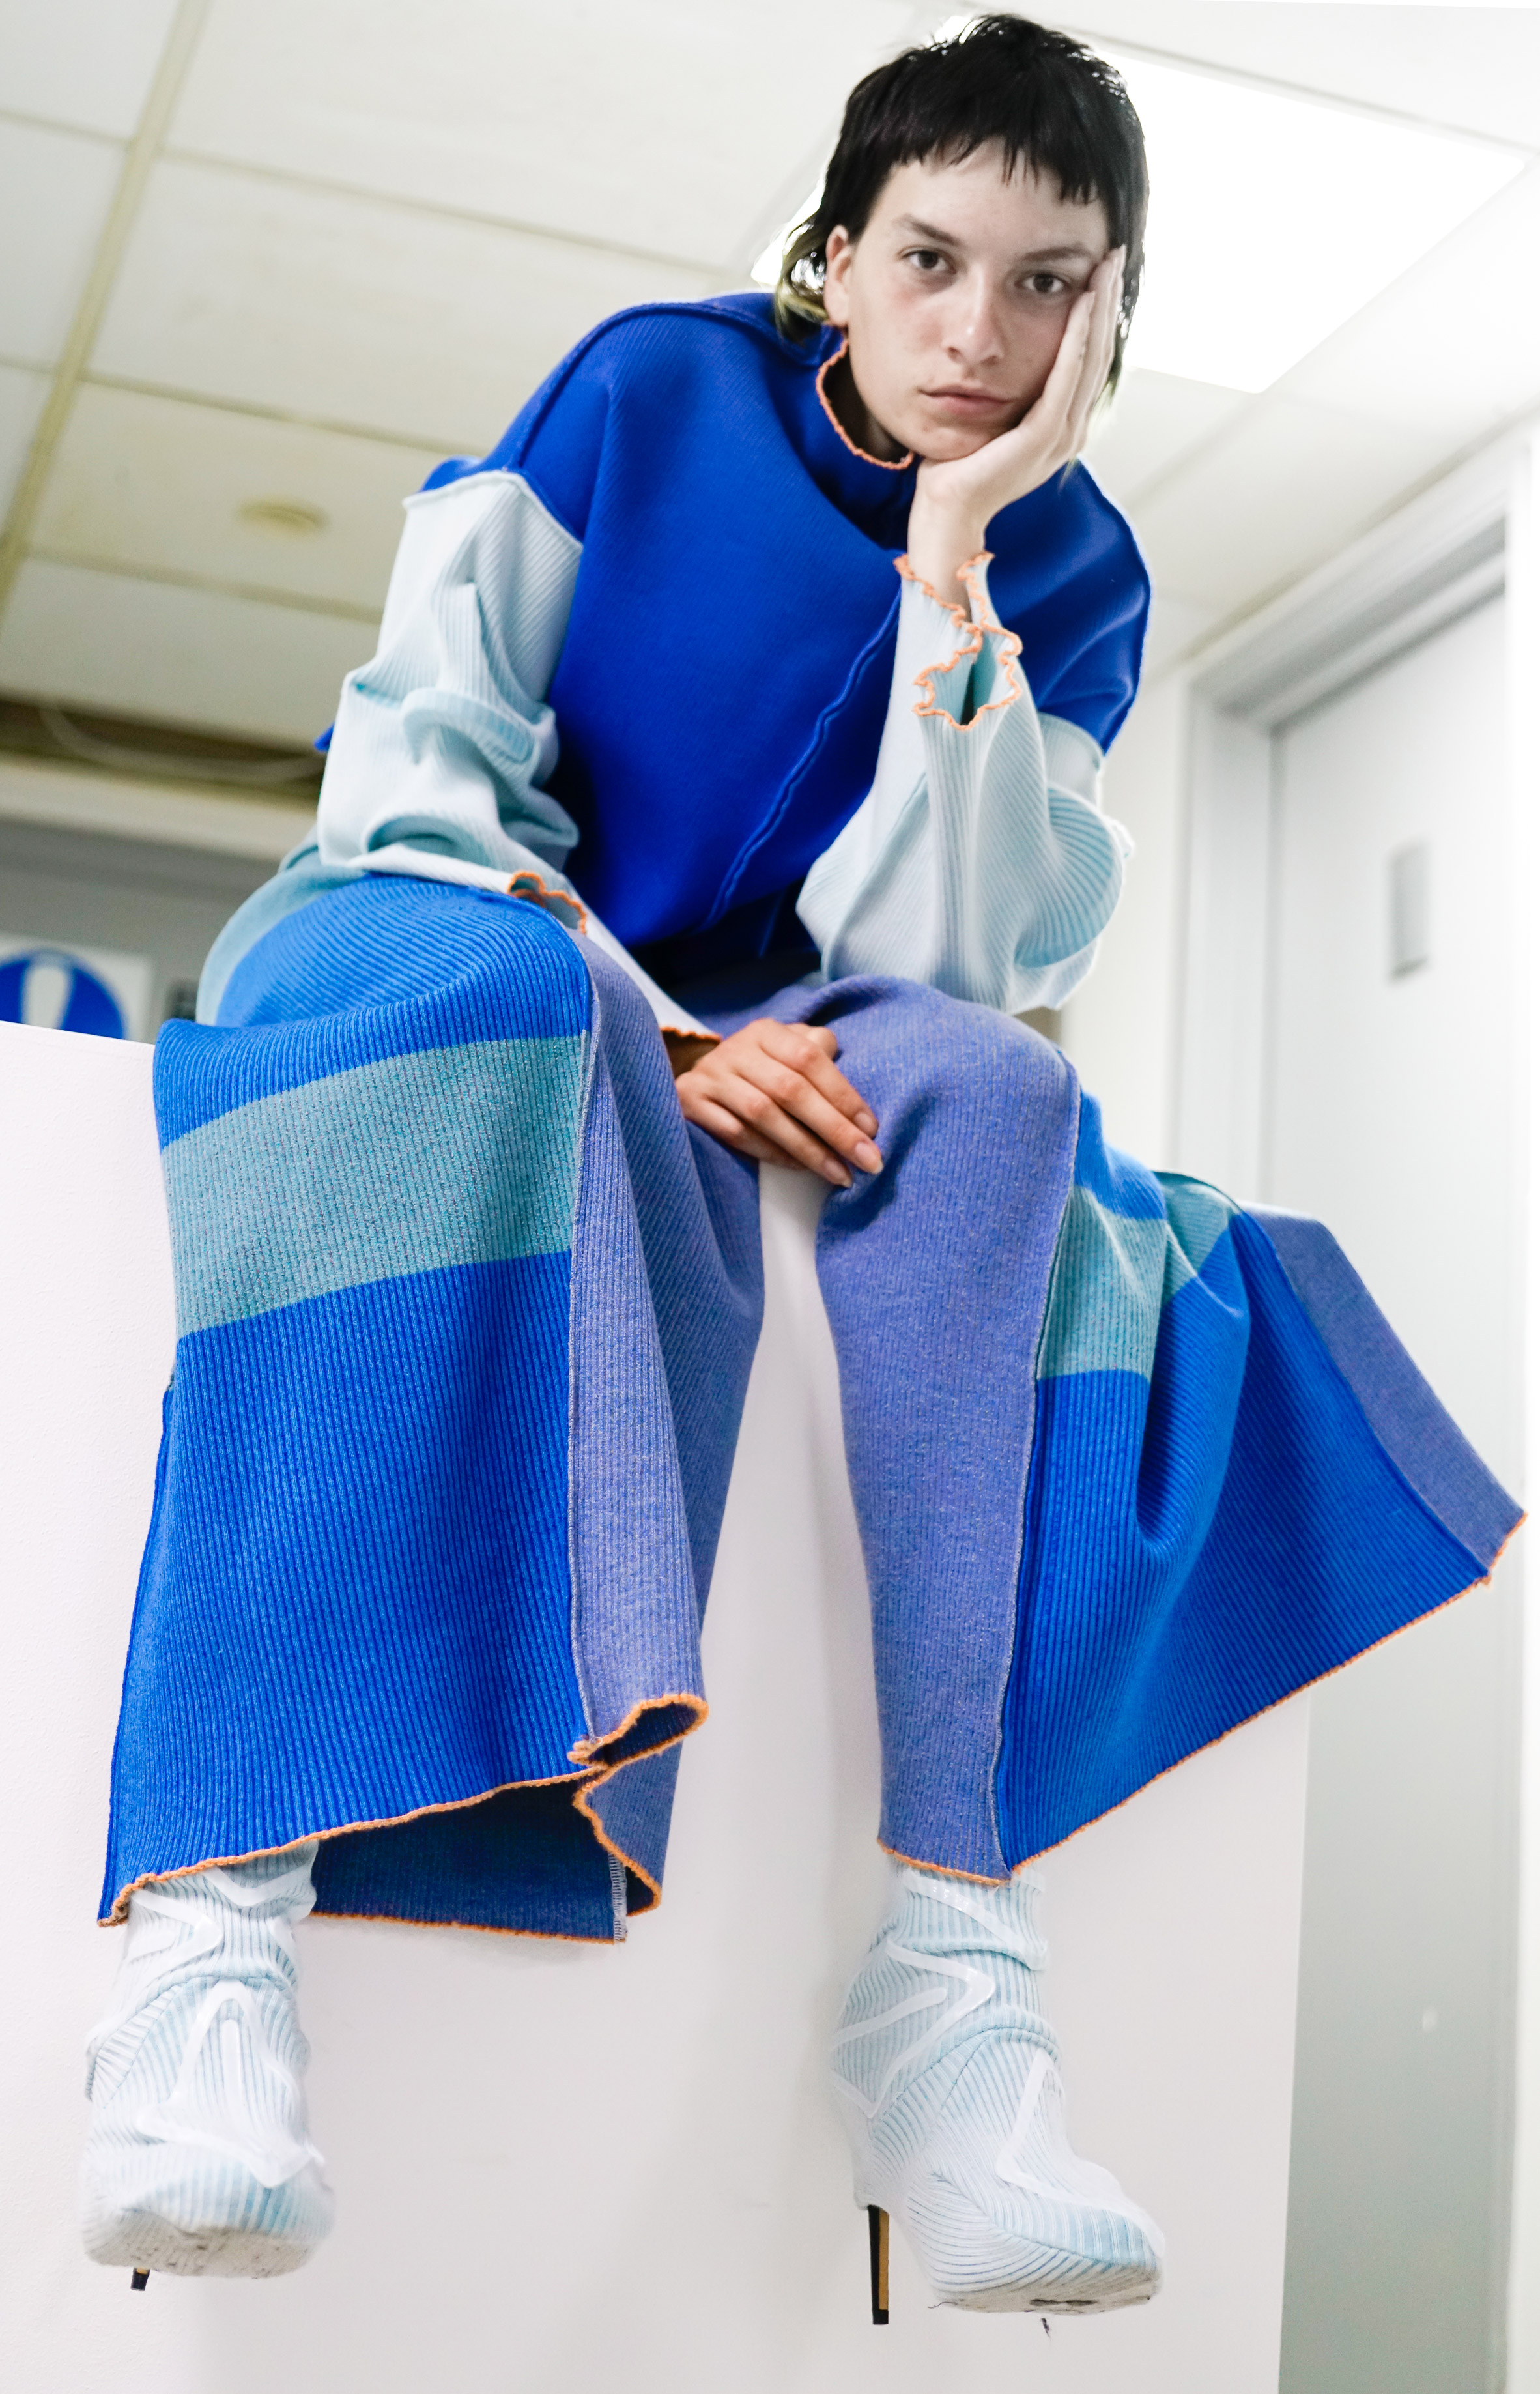 Lingxiao Luo creates playful knitwear using 3d-printing